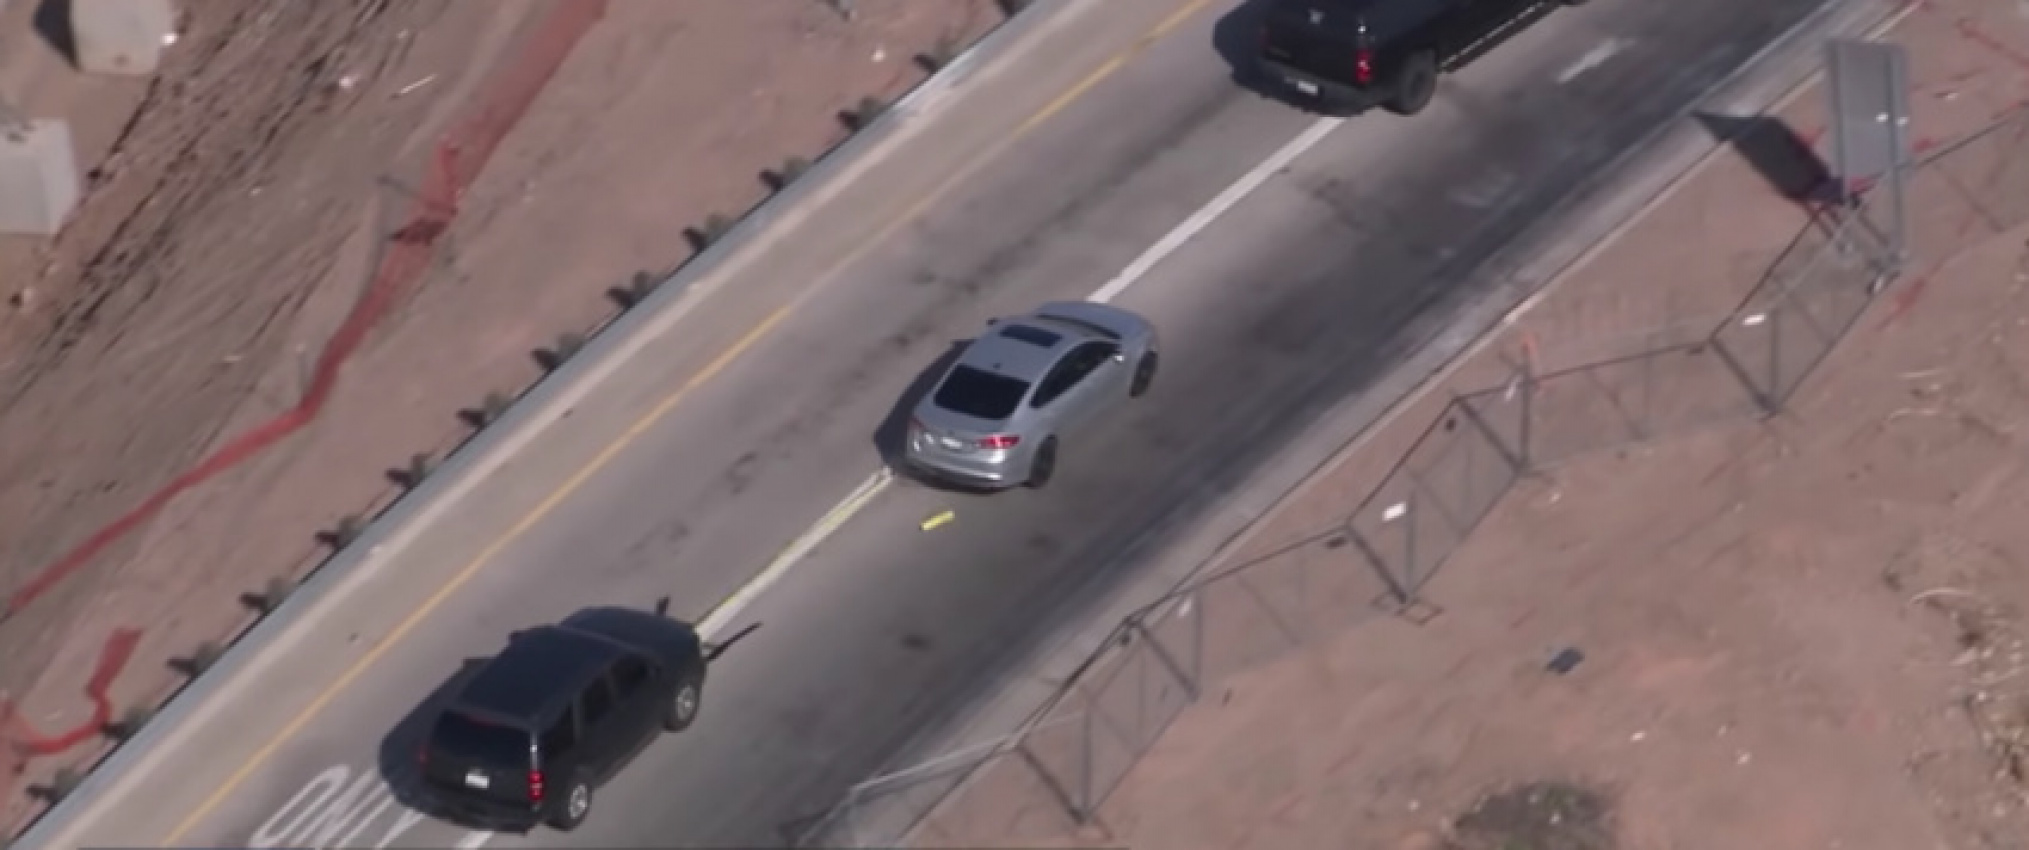 apple, apple car, autos, cars, police, watch arizona police use batman-esque device called  “the grappler” to end car chase